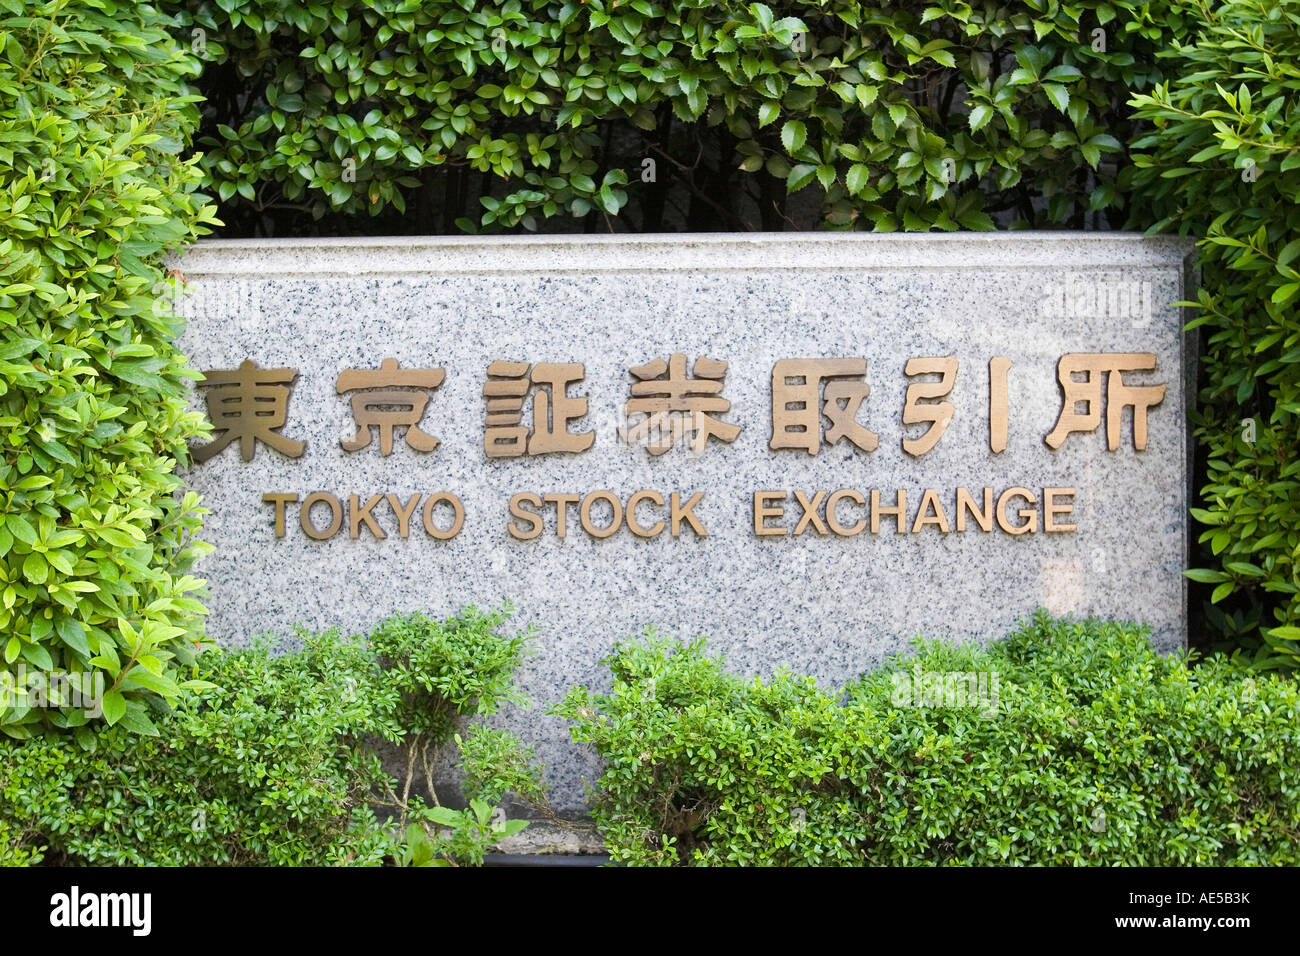 Tokyo Stock Exchange sign with gold Japanese characters on marble located outside the building Tokyo Japan Stock Photo